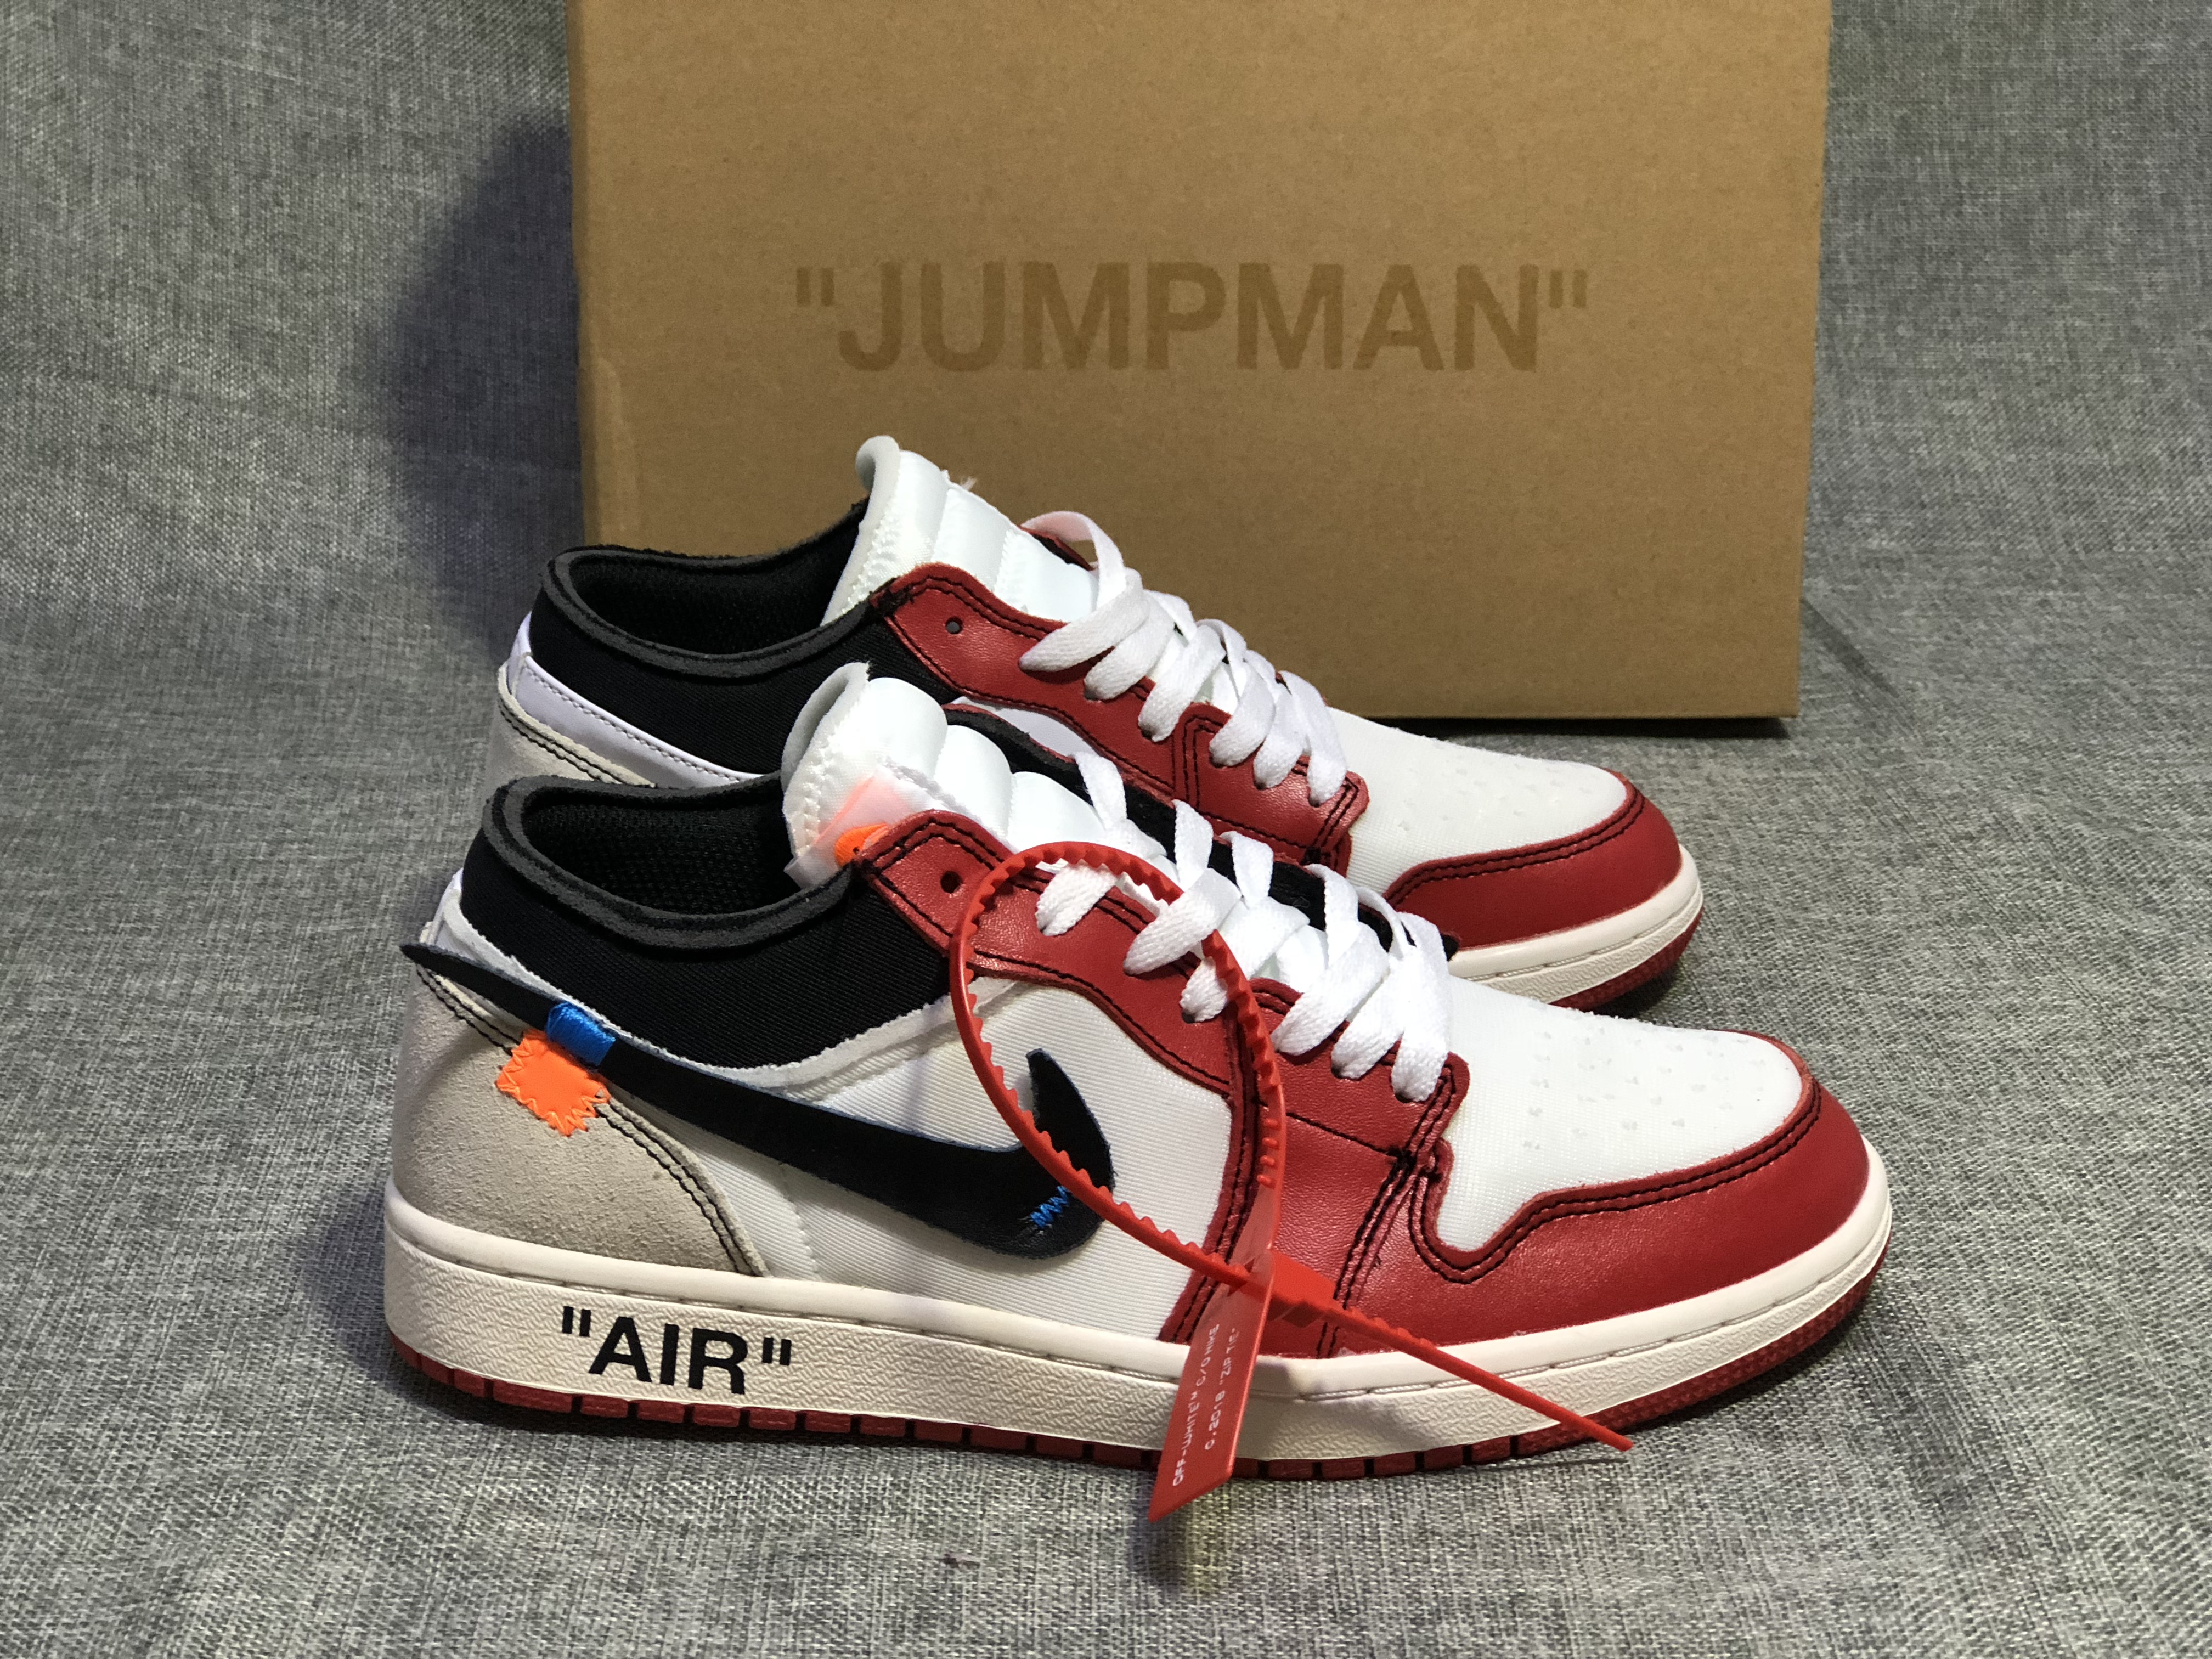 Air Jordan 1 low x Off-white Chicago White Red Black Lover Shoes